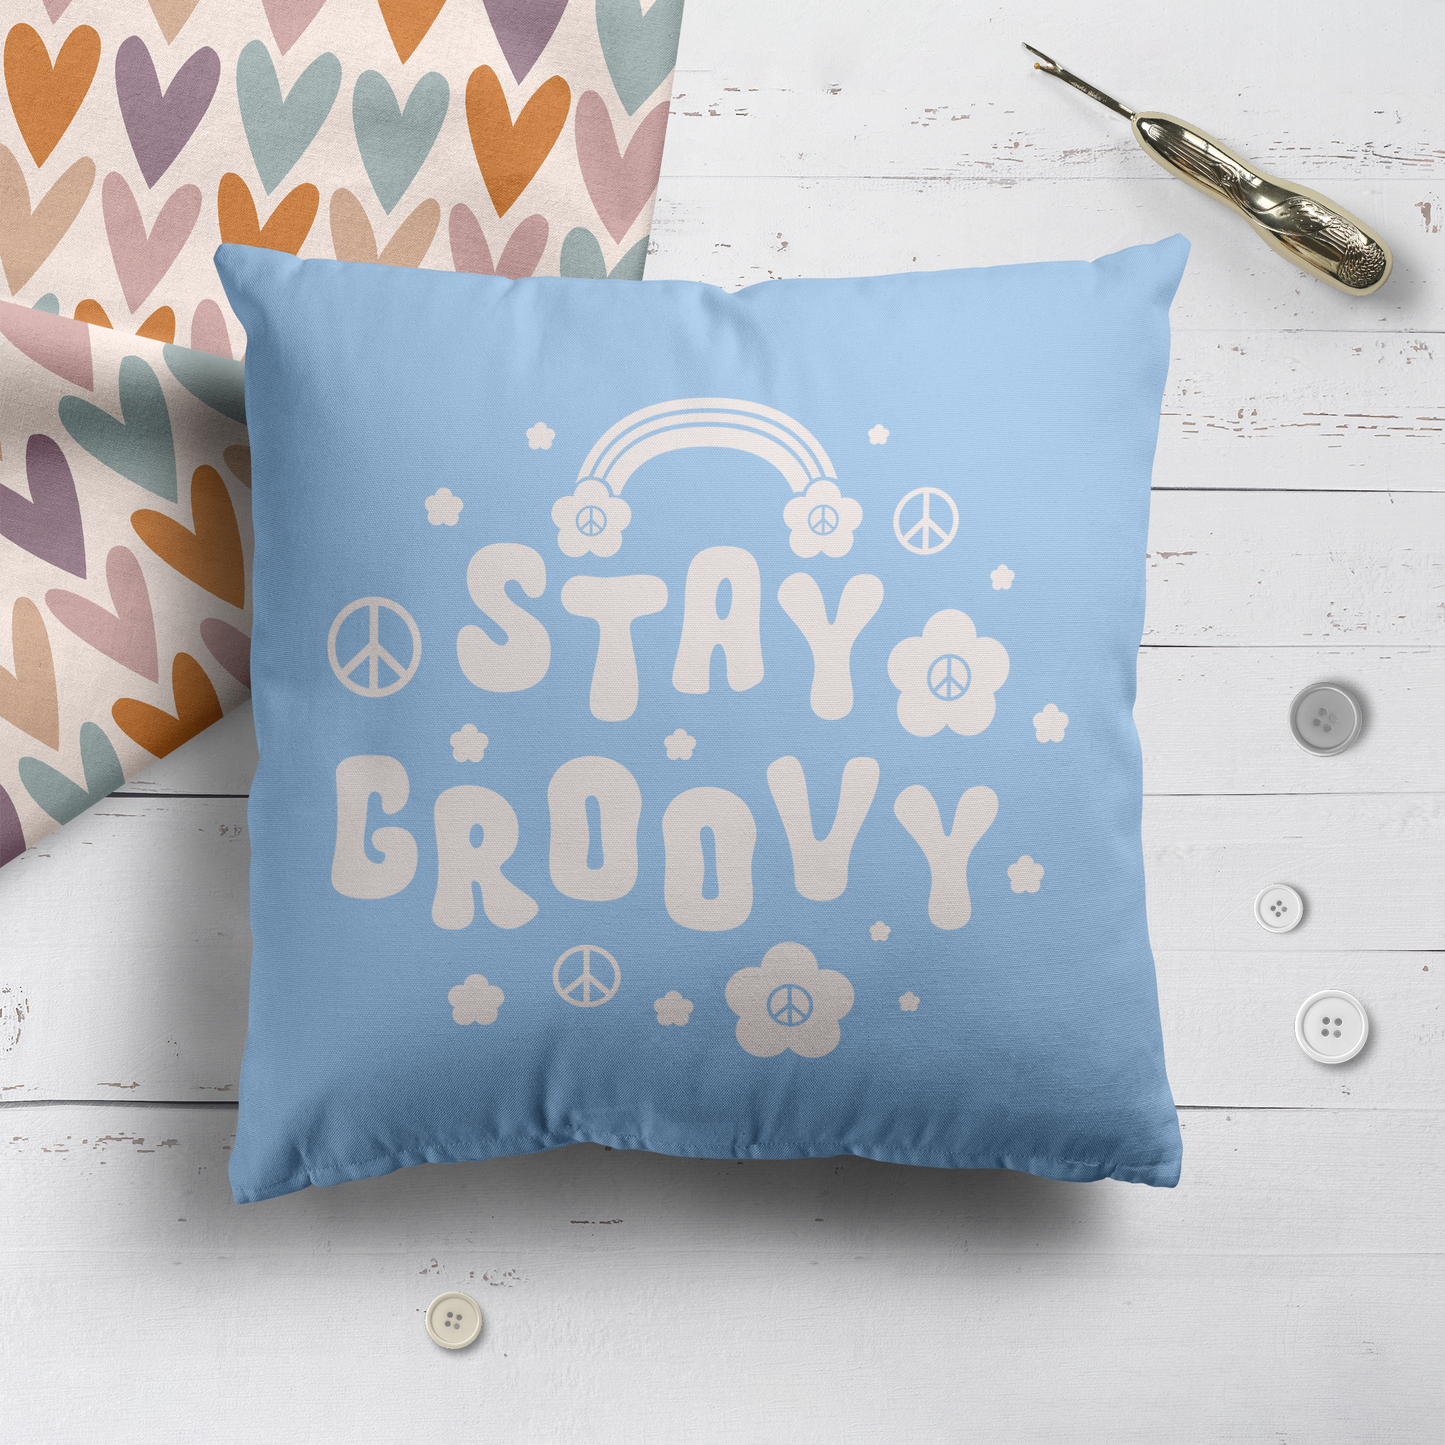 Baby Blue Stay Groovy Throw Pillow